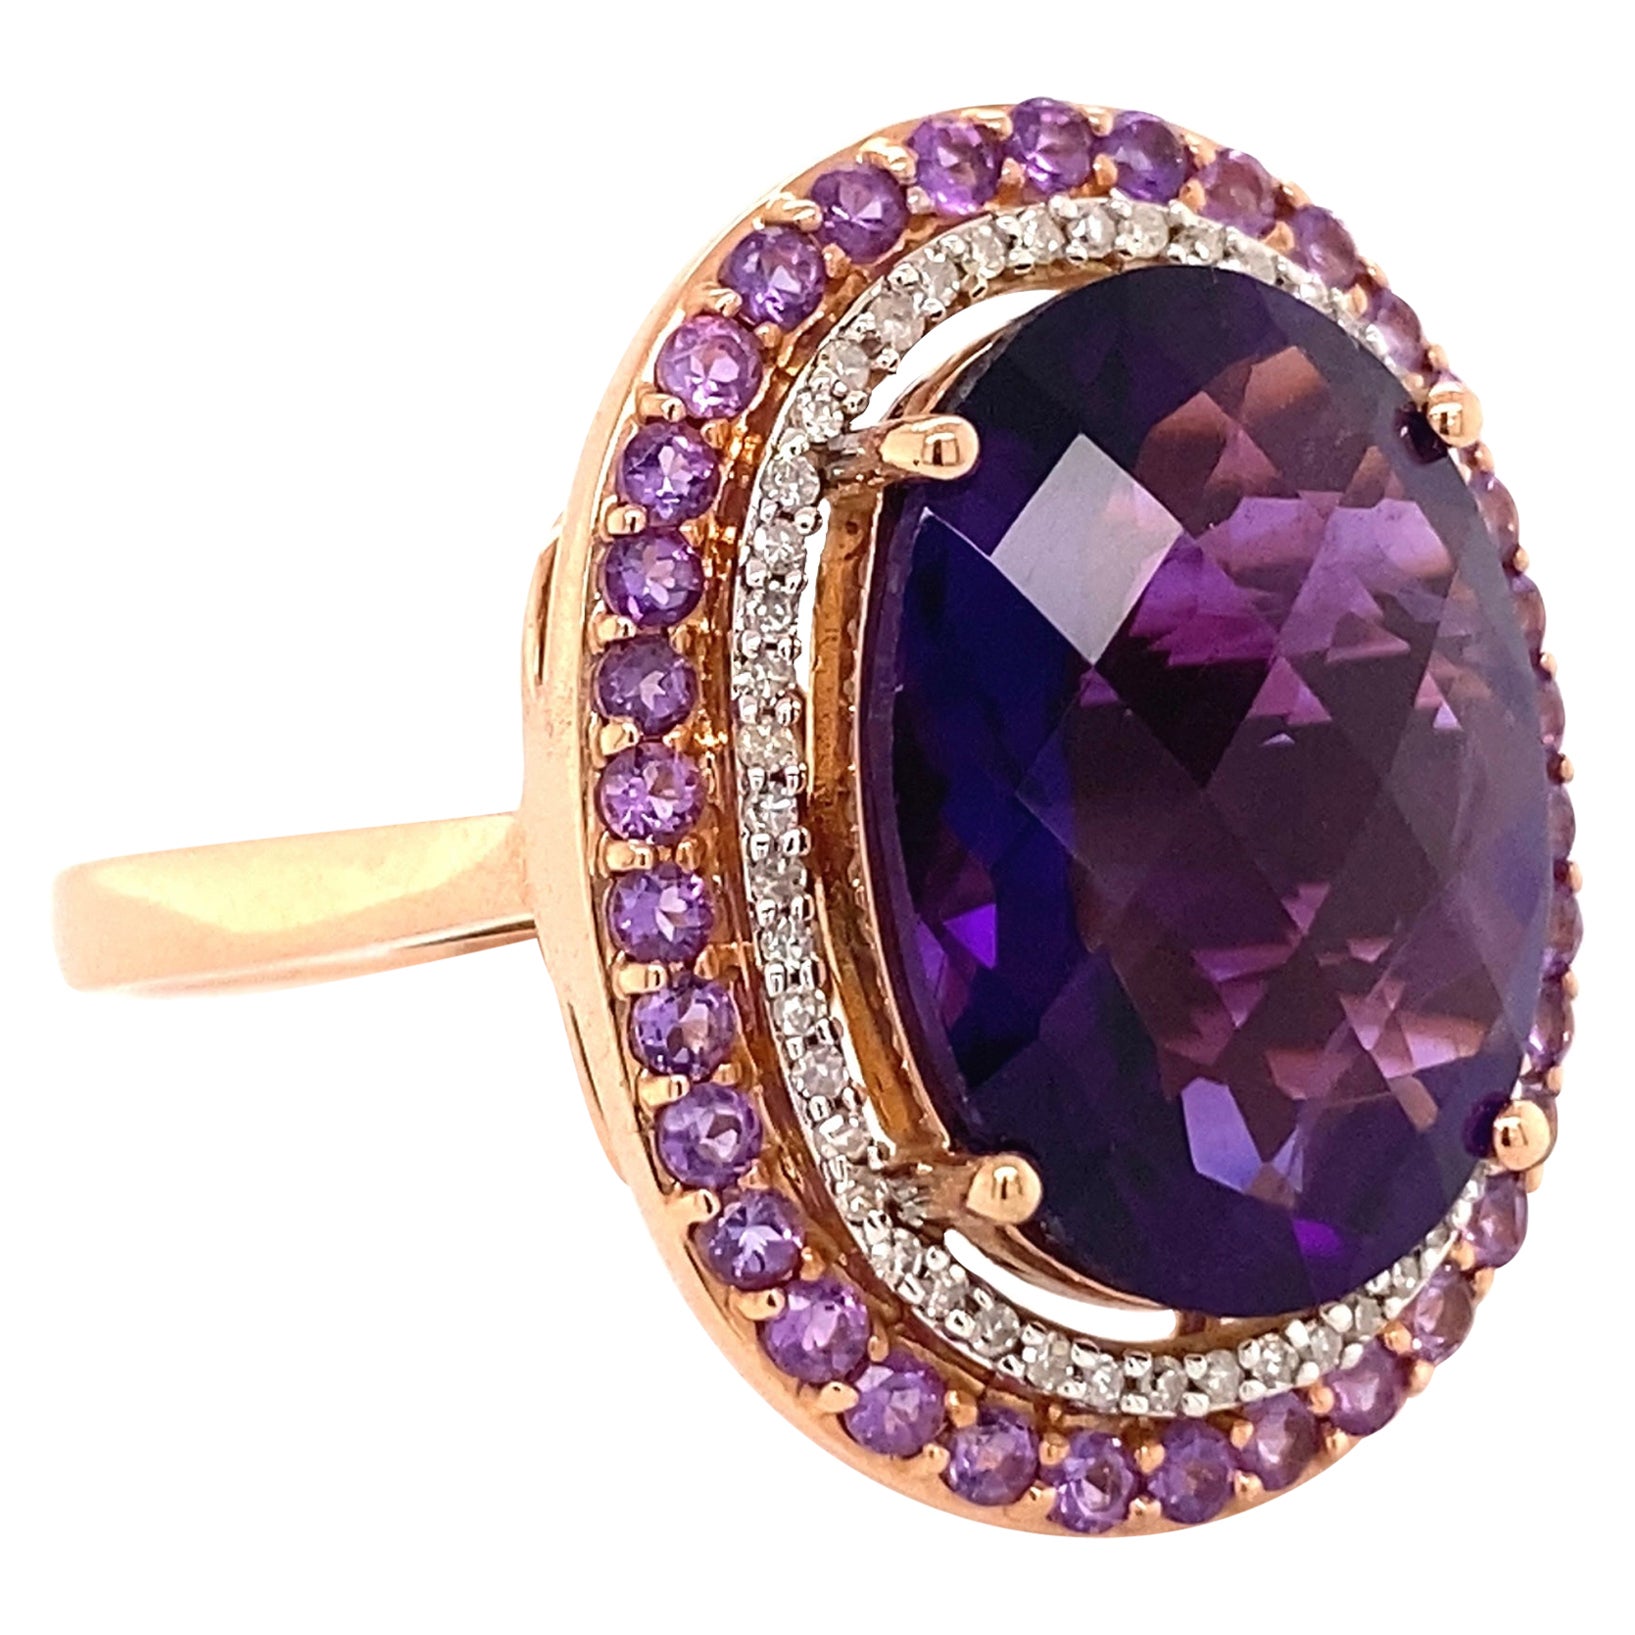 Awesome Large Oval Amethyst and Diamond Cocktail Ring Estate Fine Jewelry